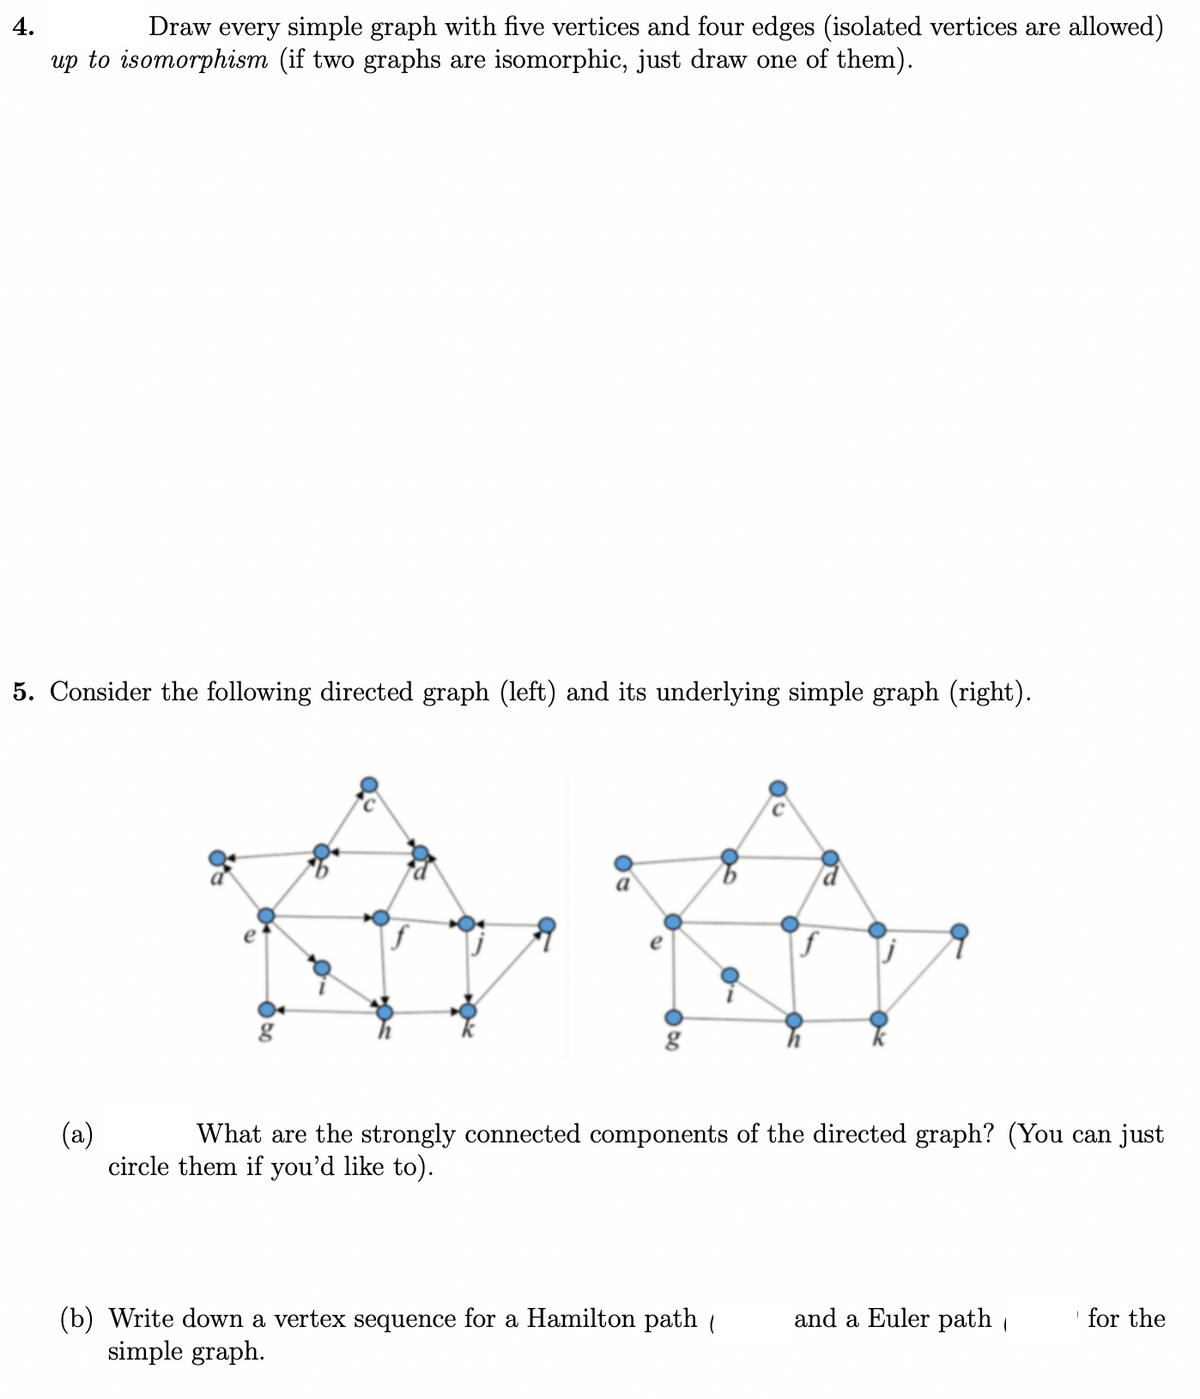 4.
Draw every simple graph with five vertices and four edges (isolated vertices are allowed)
up to isomorphism (if two graphs are isomorphic, just draw one of them).
5. Consider the following directed graph (left) and its underlying simple graph (right).
a
(a)
circle them if you'd like to).
What are the strongly connected components of the directed graph? (You can just
and a Euler path
(b) Write down a vertex sequence for a Hamilton path (
simple graph.
for the
